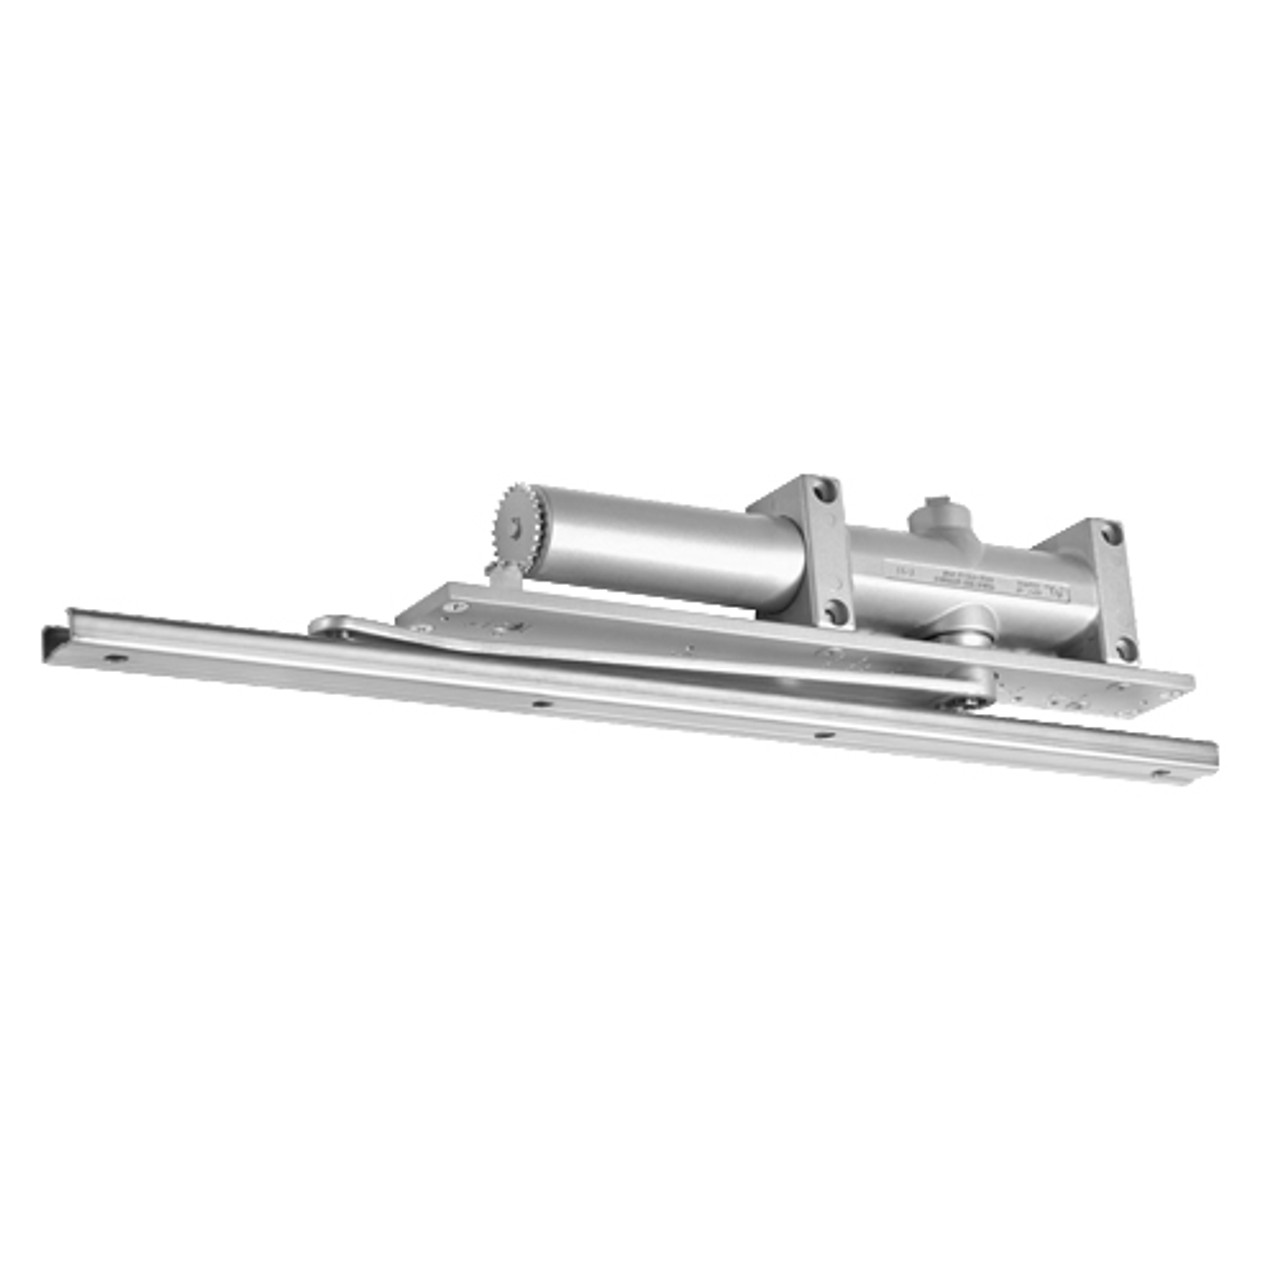 7974-689-LH Norton 7900 Series Non-Hold Open Overhead Concealed Security Closers with Spring Size 4 in Aluminum Finish